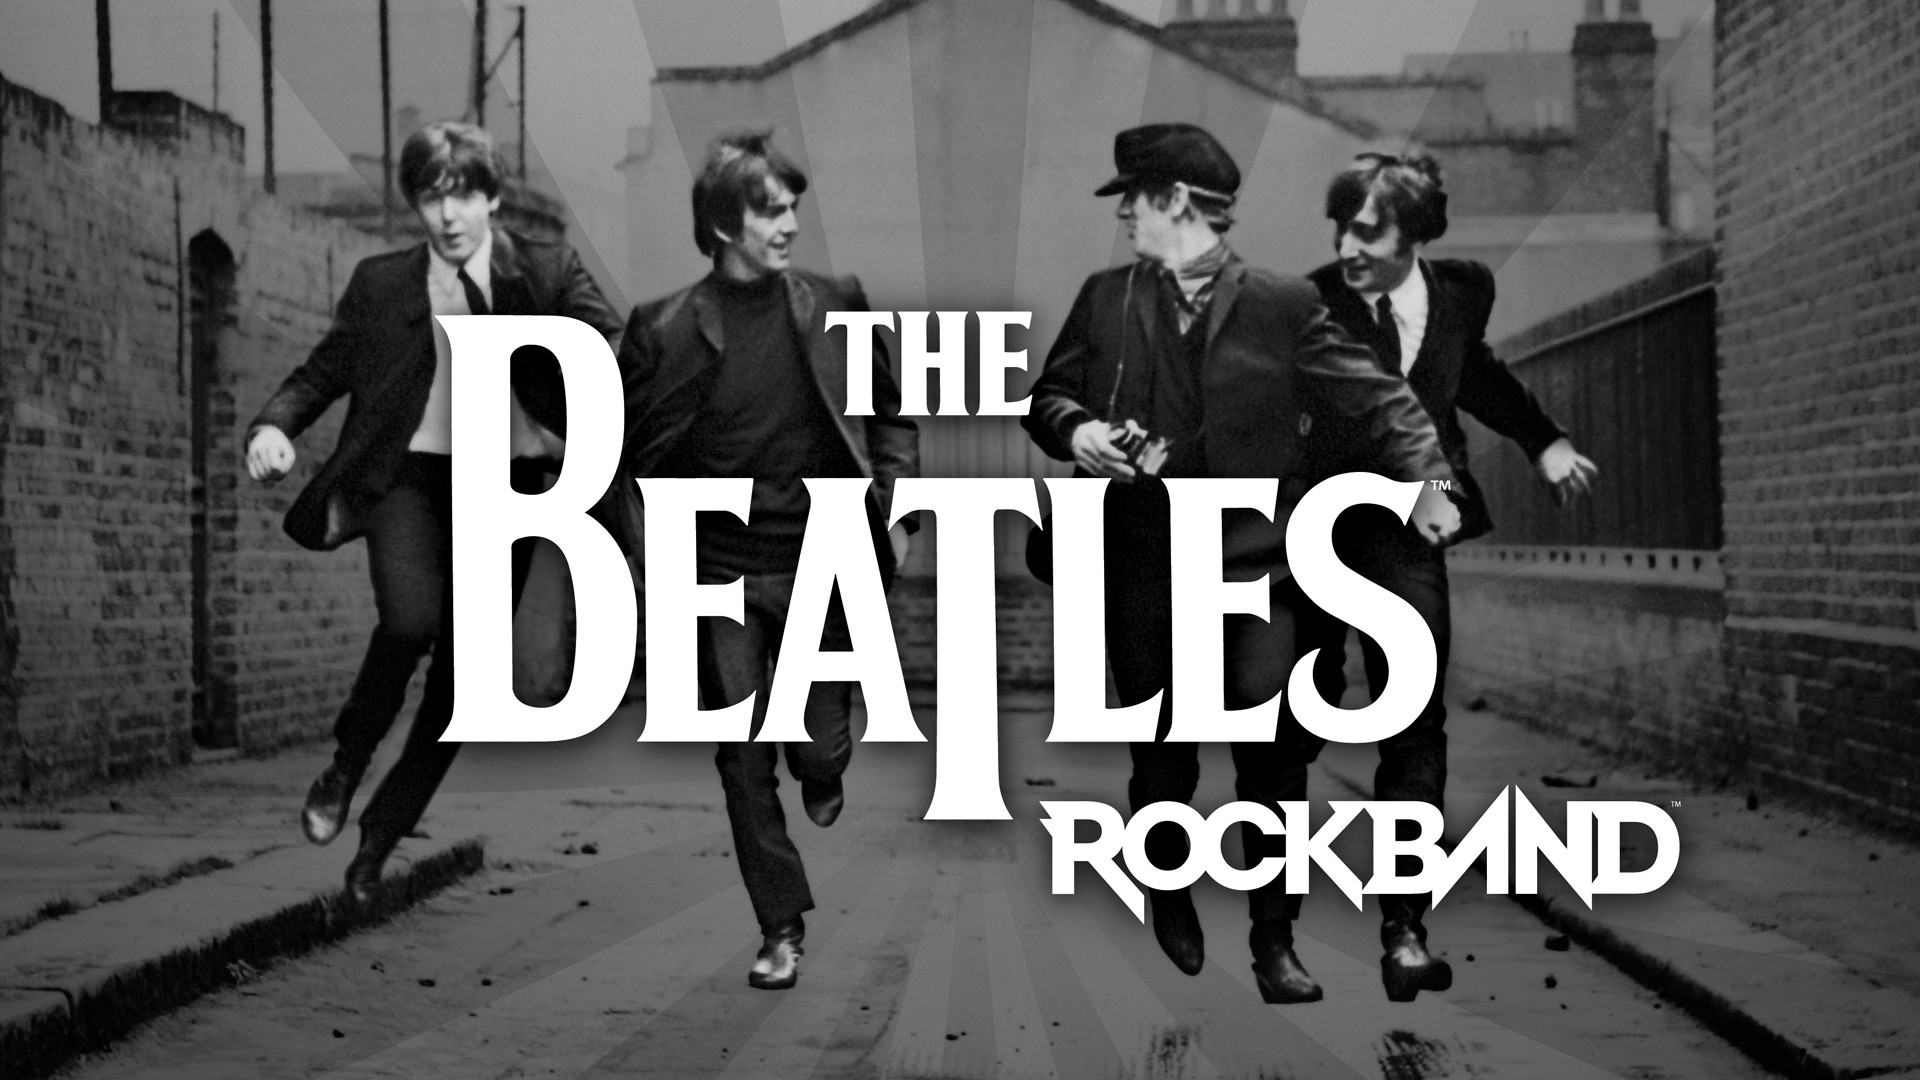 The Beatles Rock Band 1920x1080 HD Image Music and Bands